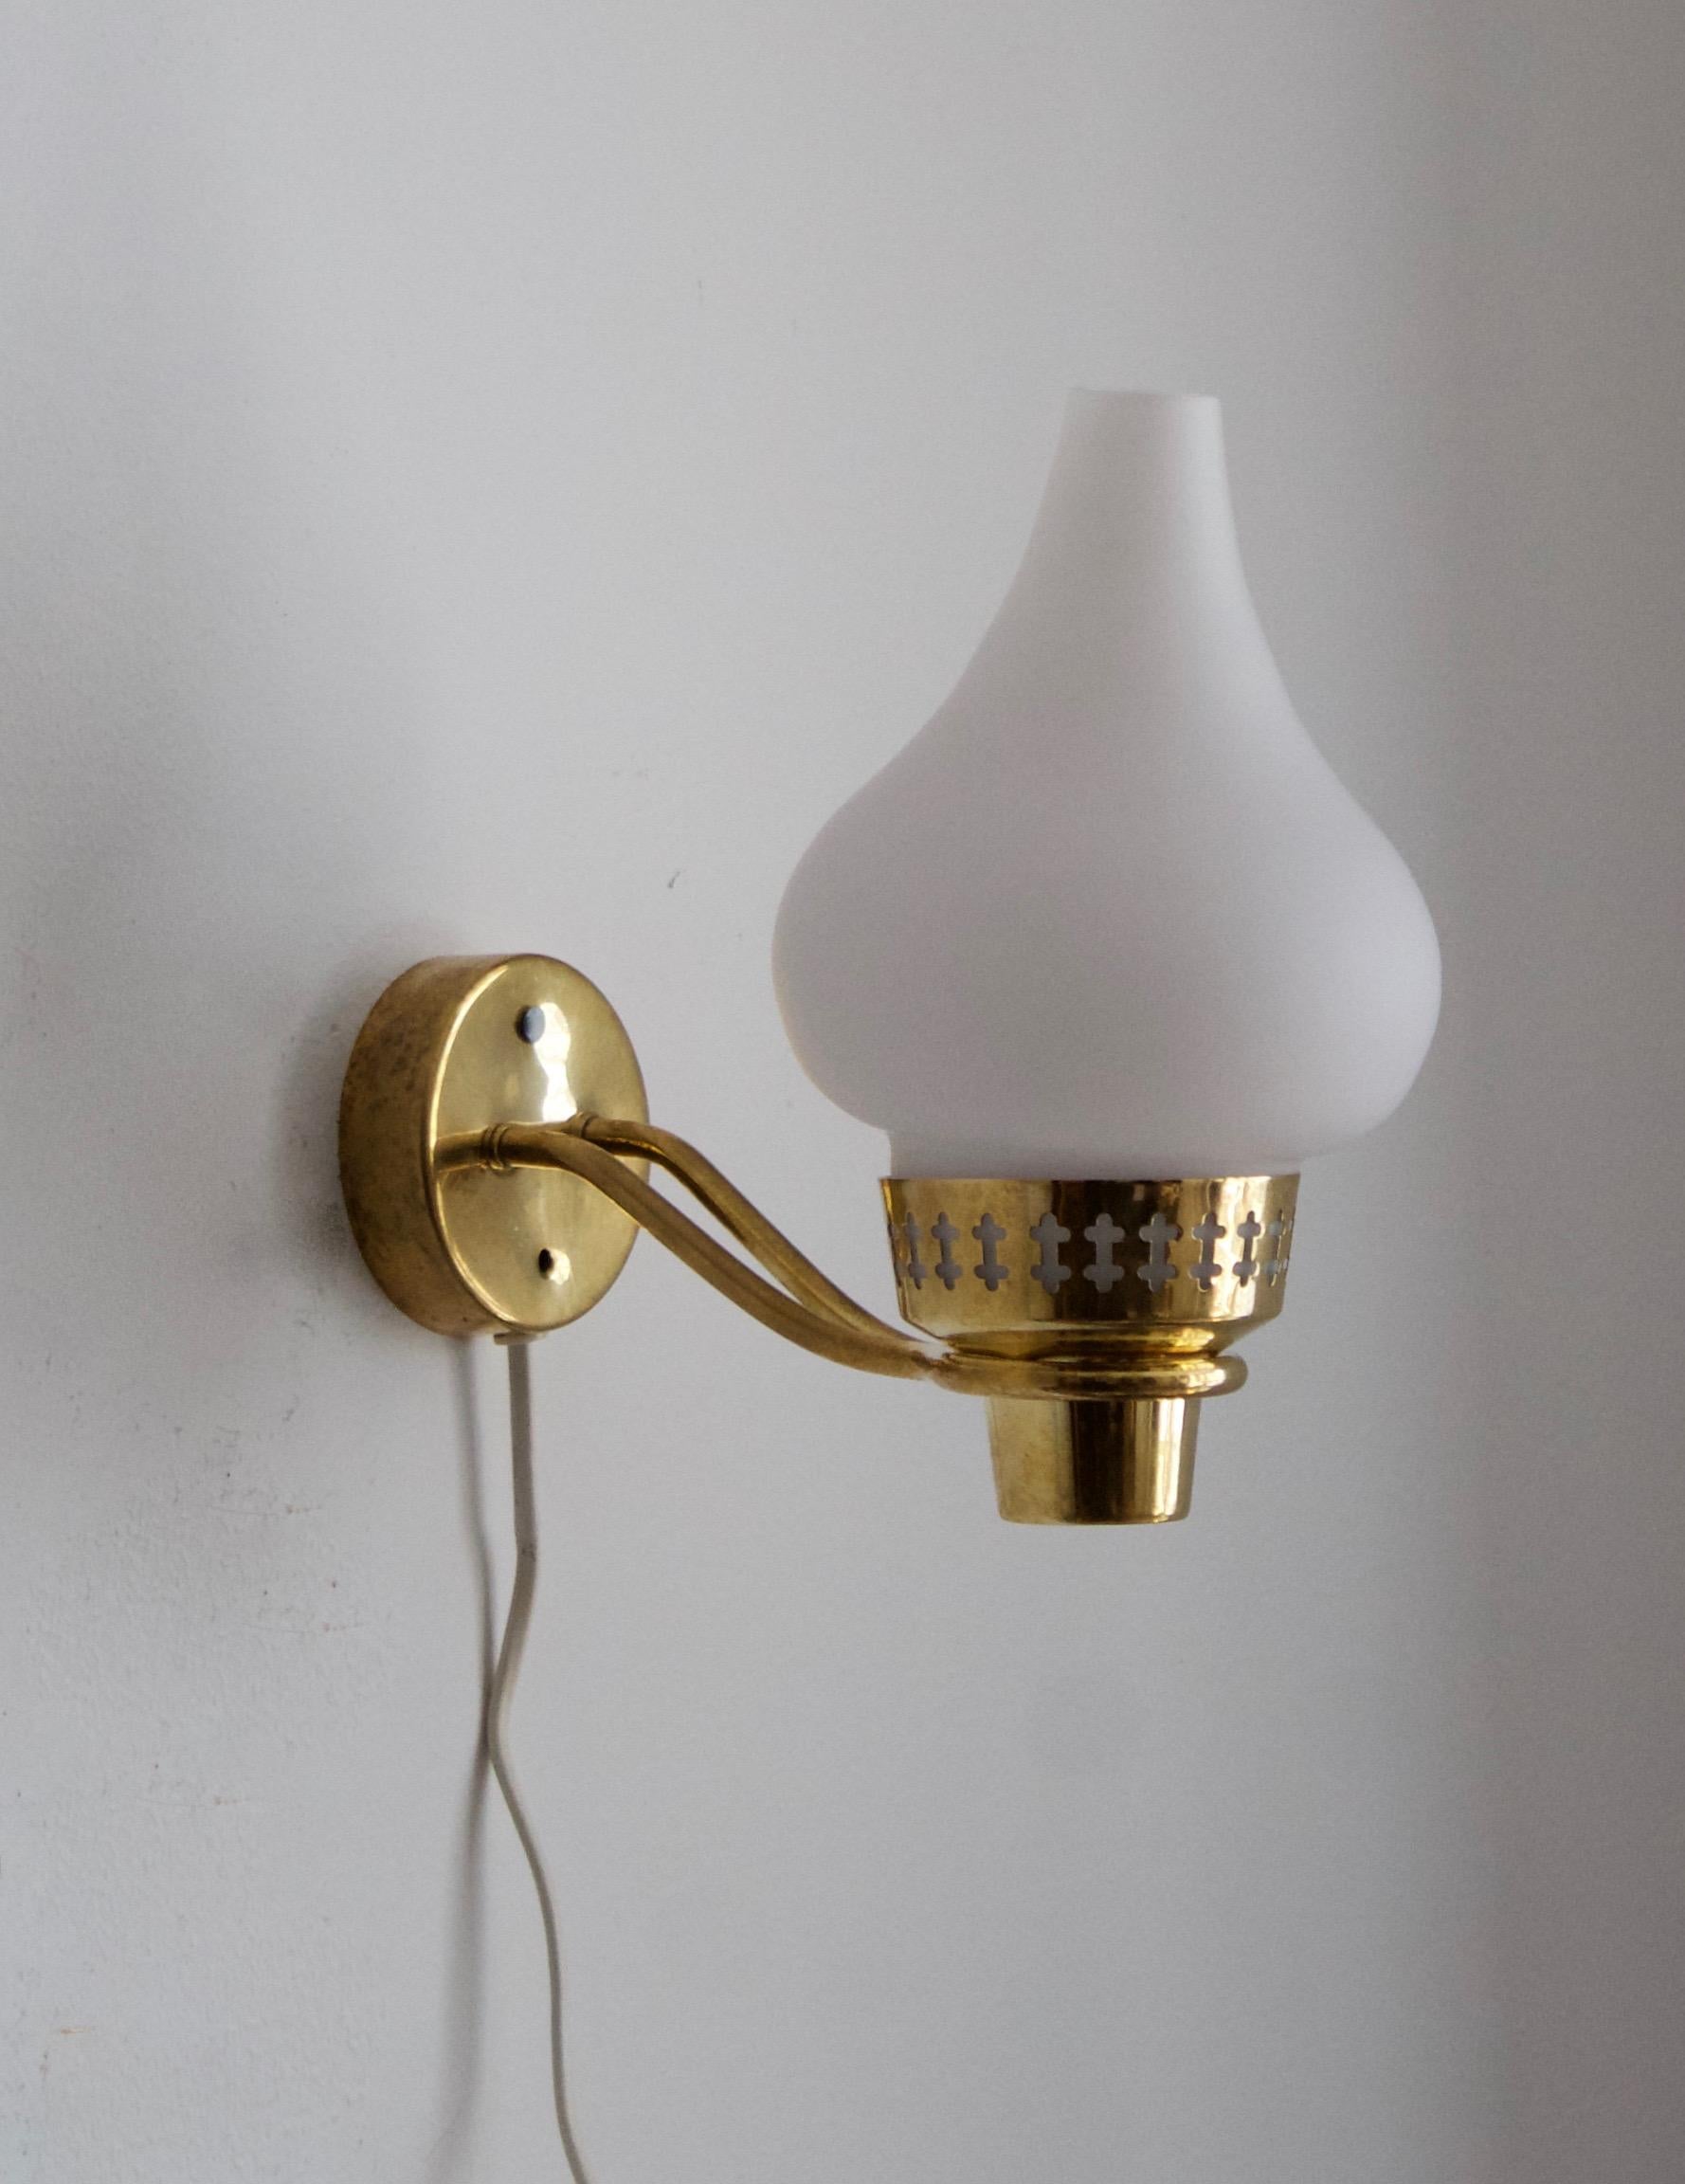 A wall light / sconce produced by Swedish Ateljé Lyktan, designed by Hans Bergström. Produced in brass, assorted vintage rattan lampshades.

Other Nordic lighting designers include Paavo Tynell, Hans-Agne Jacobson, Carl-Axel Acking, and Alvar